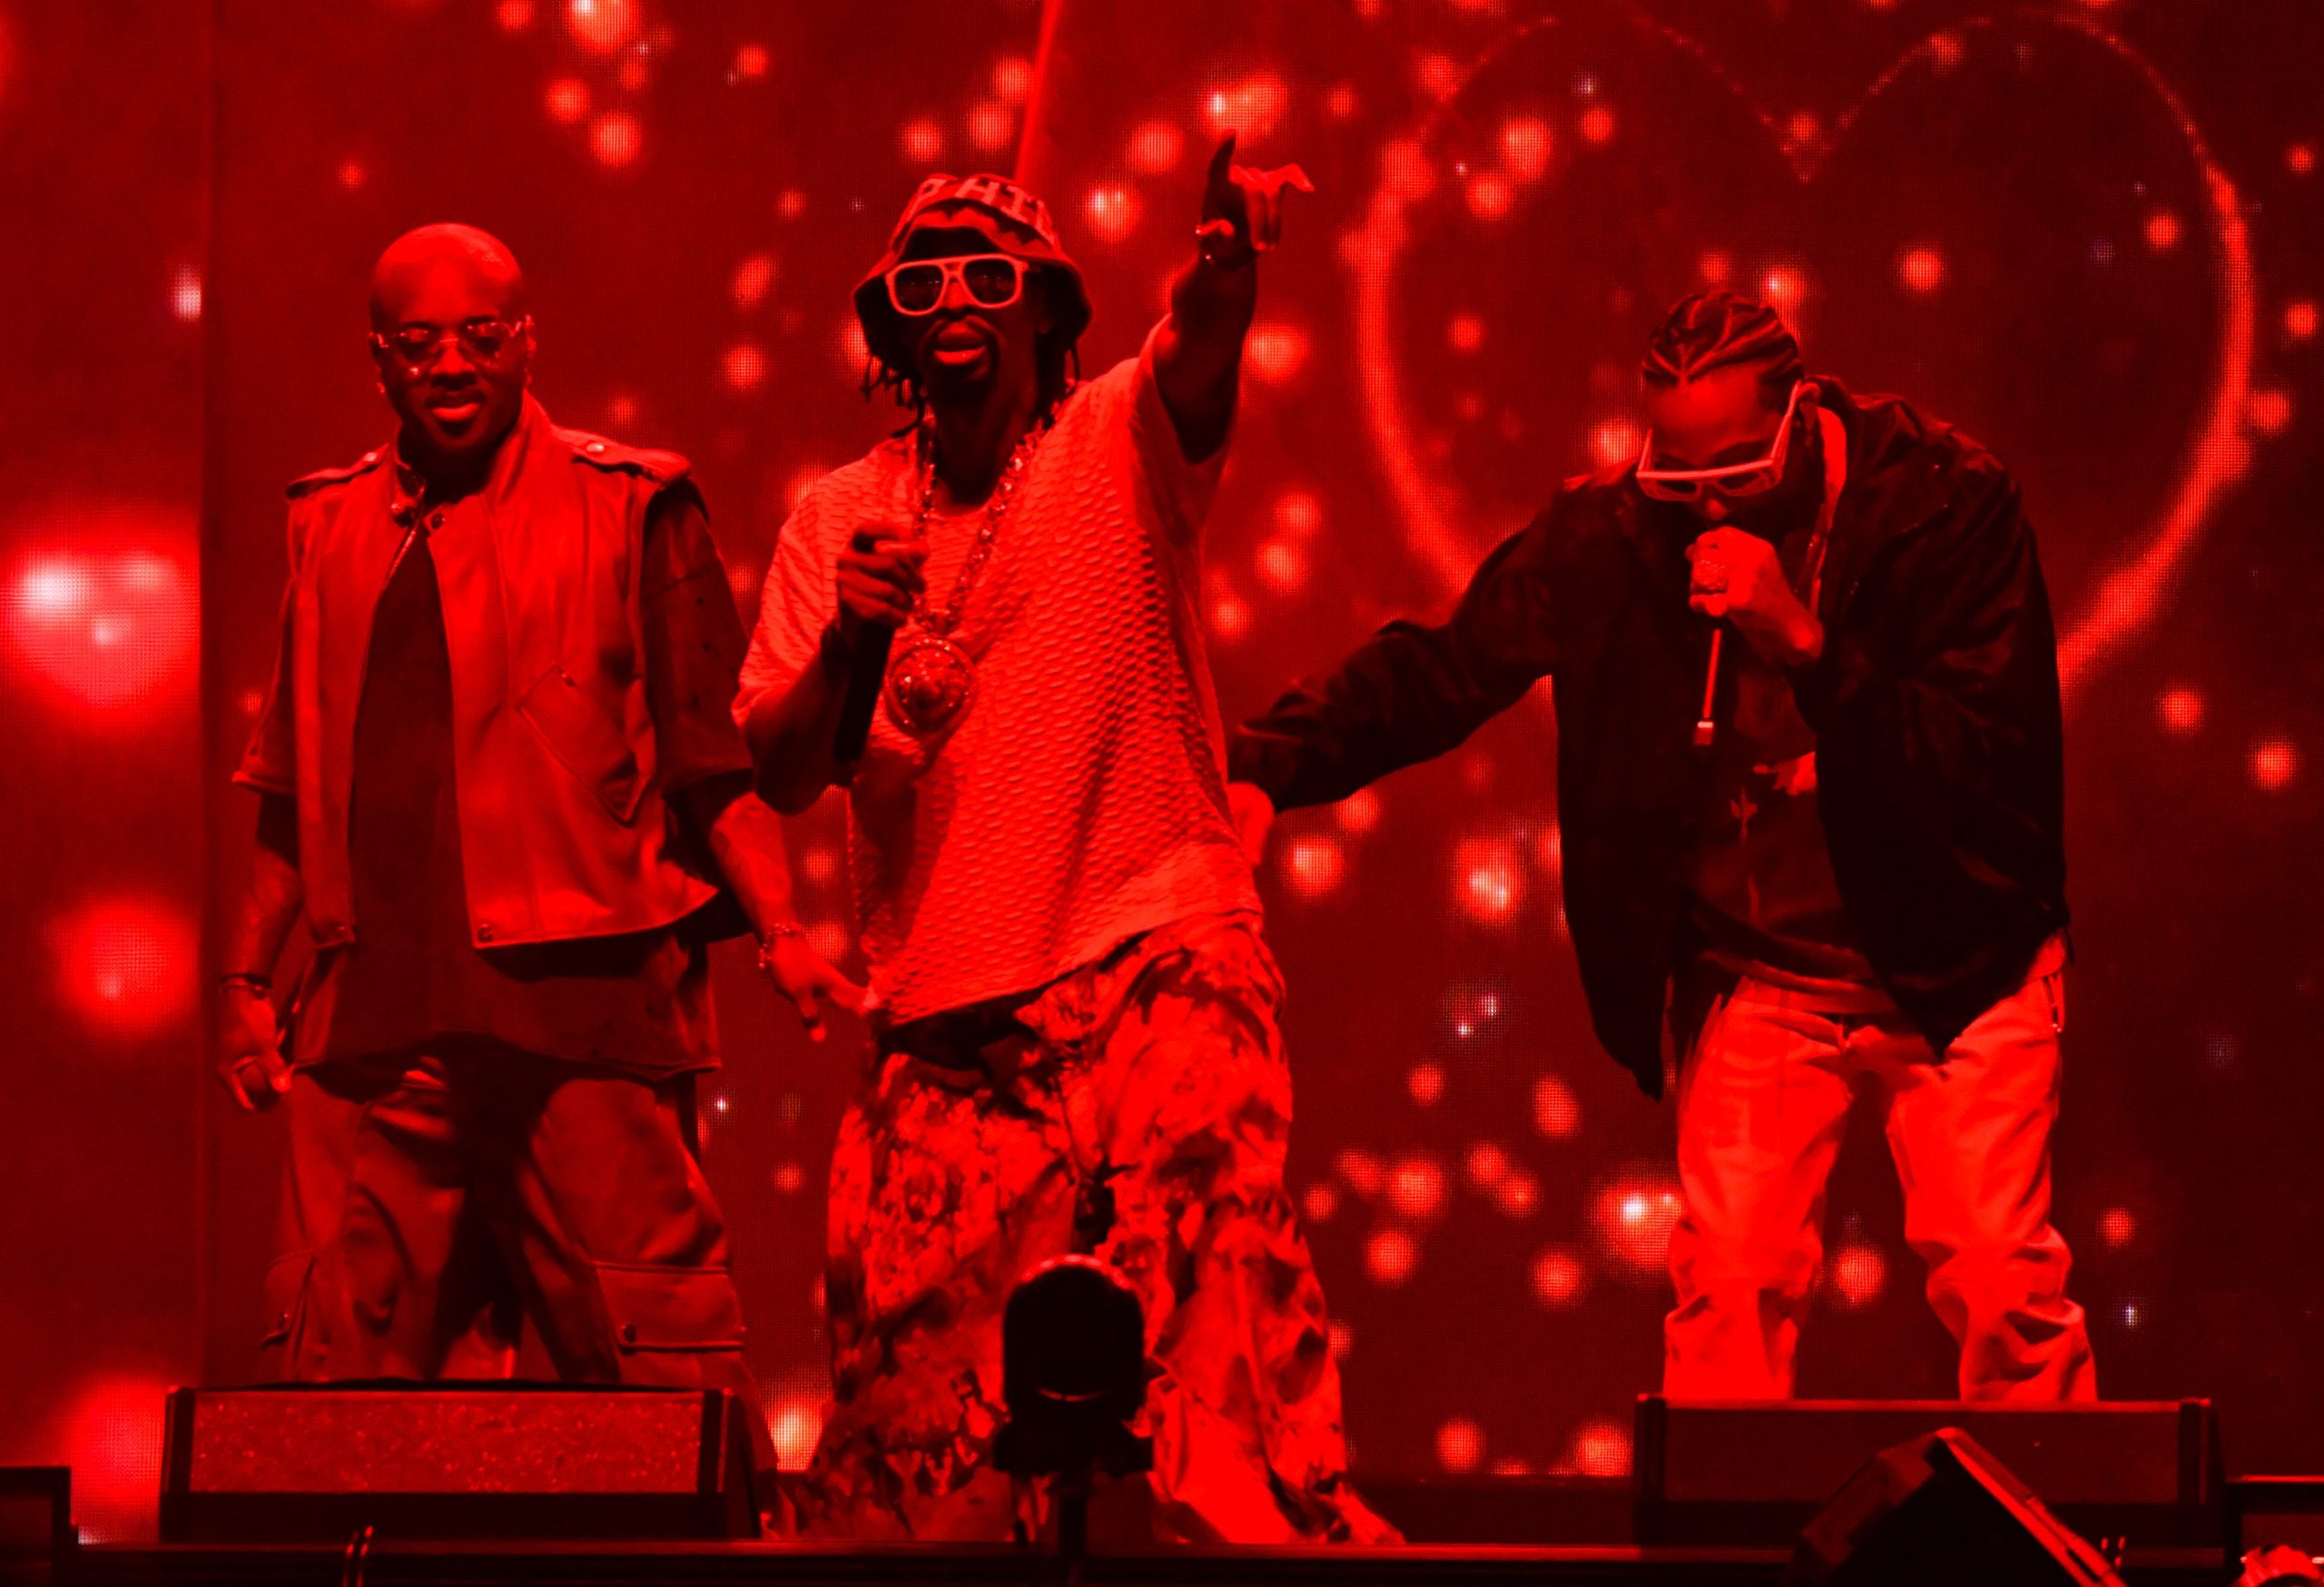 Jermaine Dupri Pays Homage To ATL’s Hip-Hop History With A Curated Dirty South Set At ESSENCE Festival